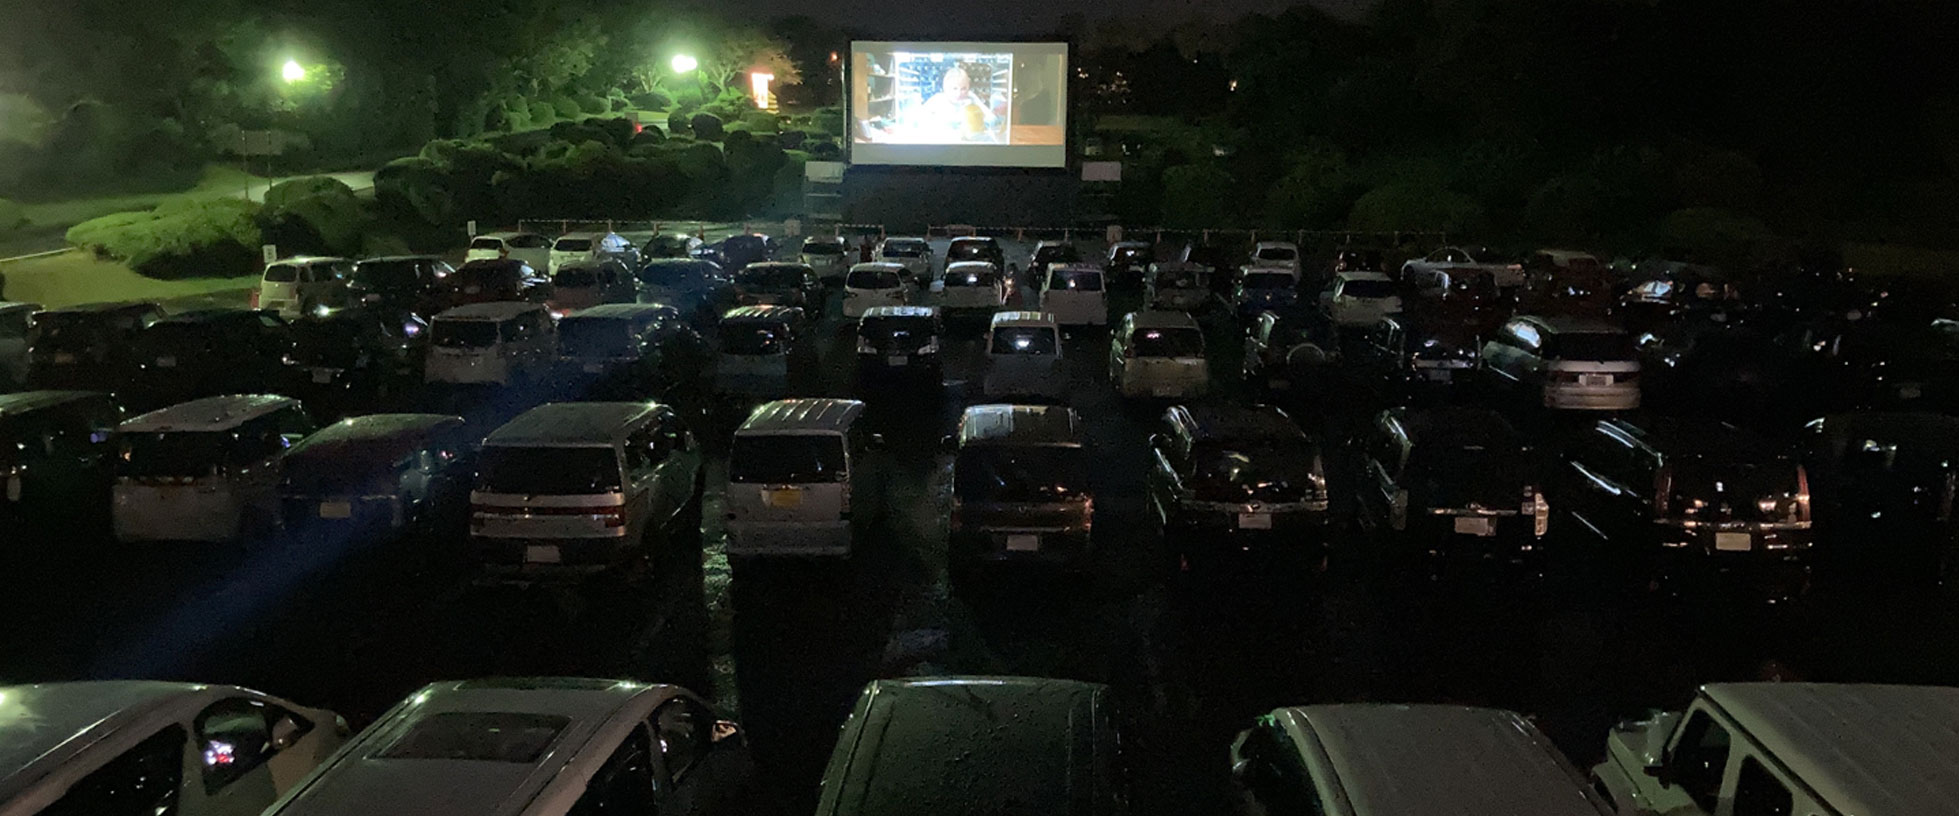 drive_in_theater_01